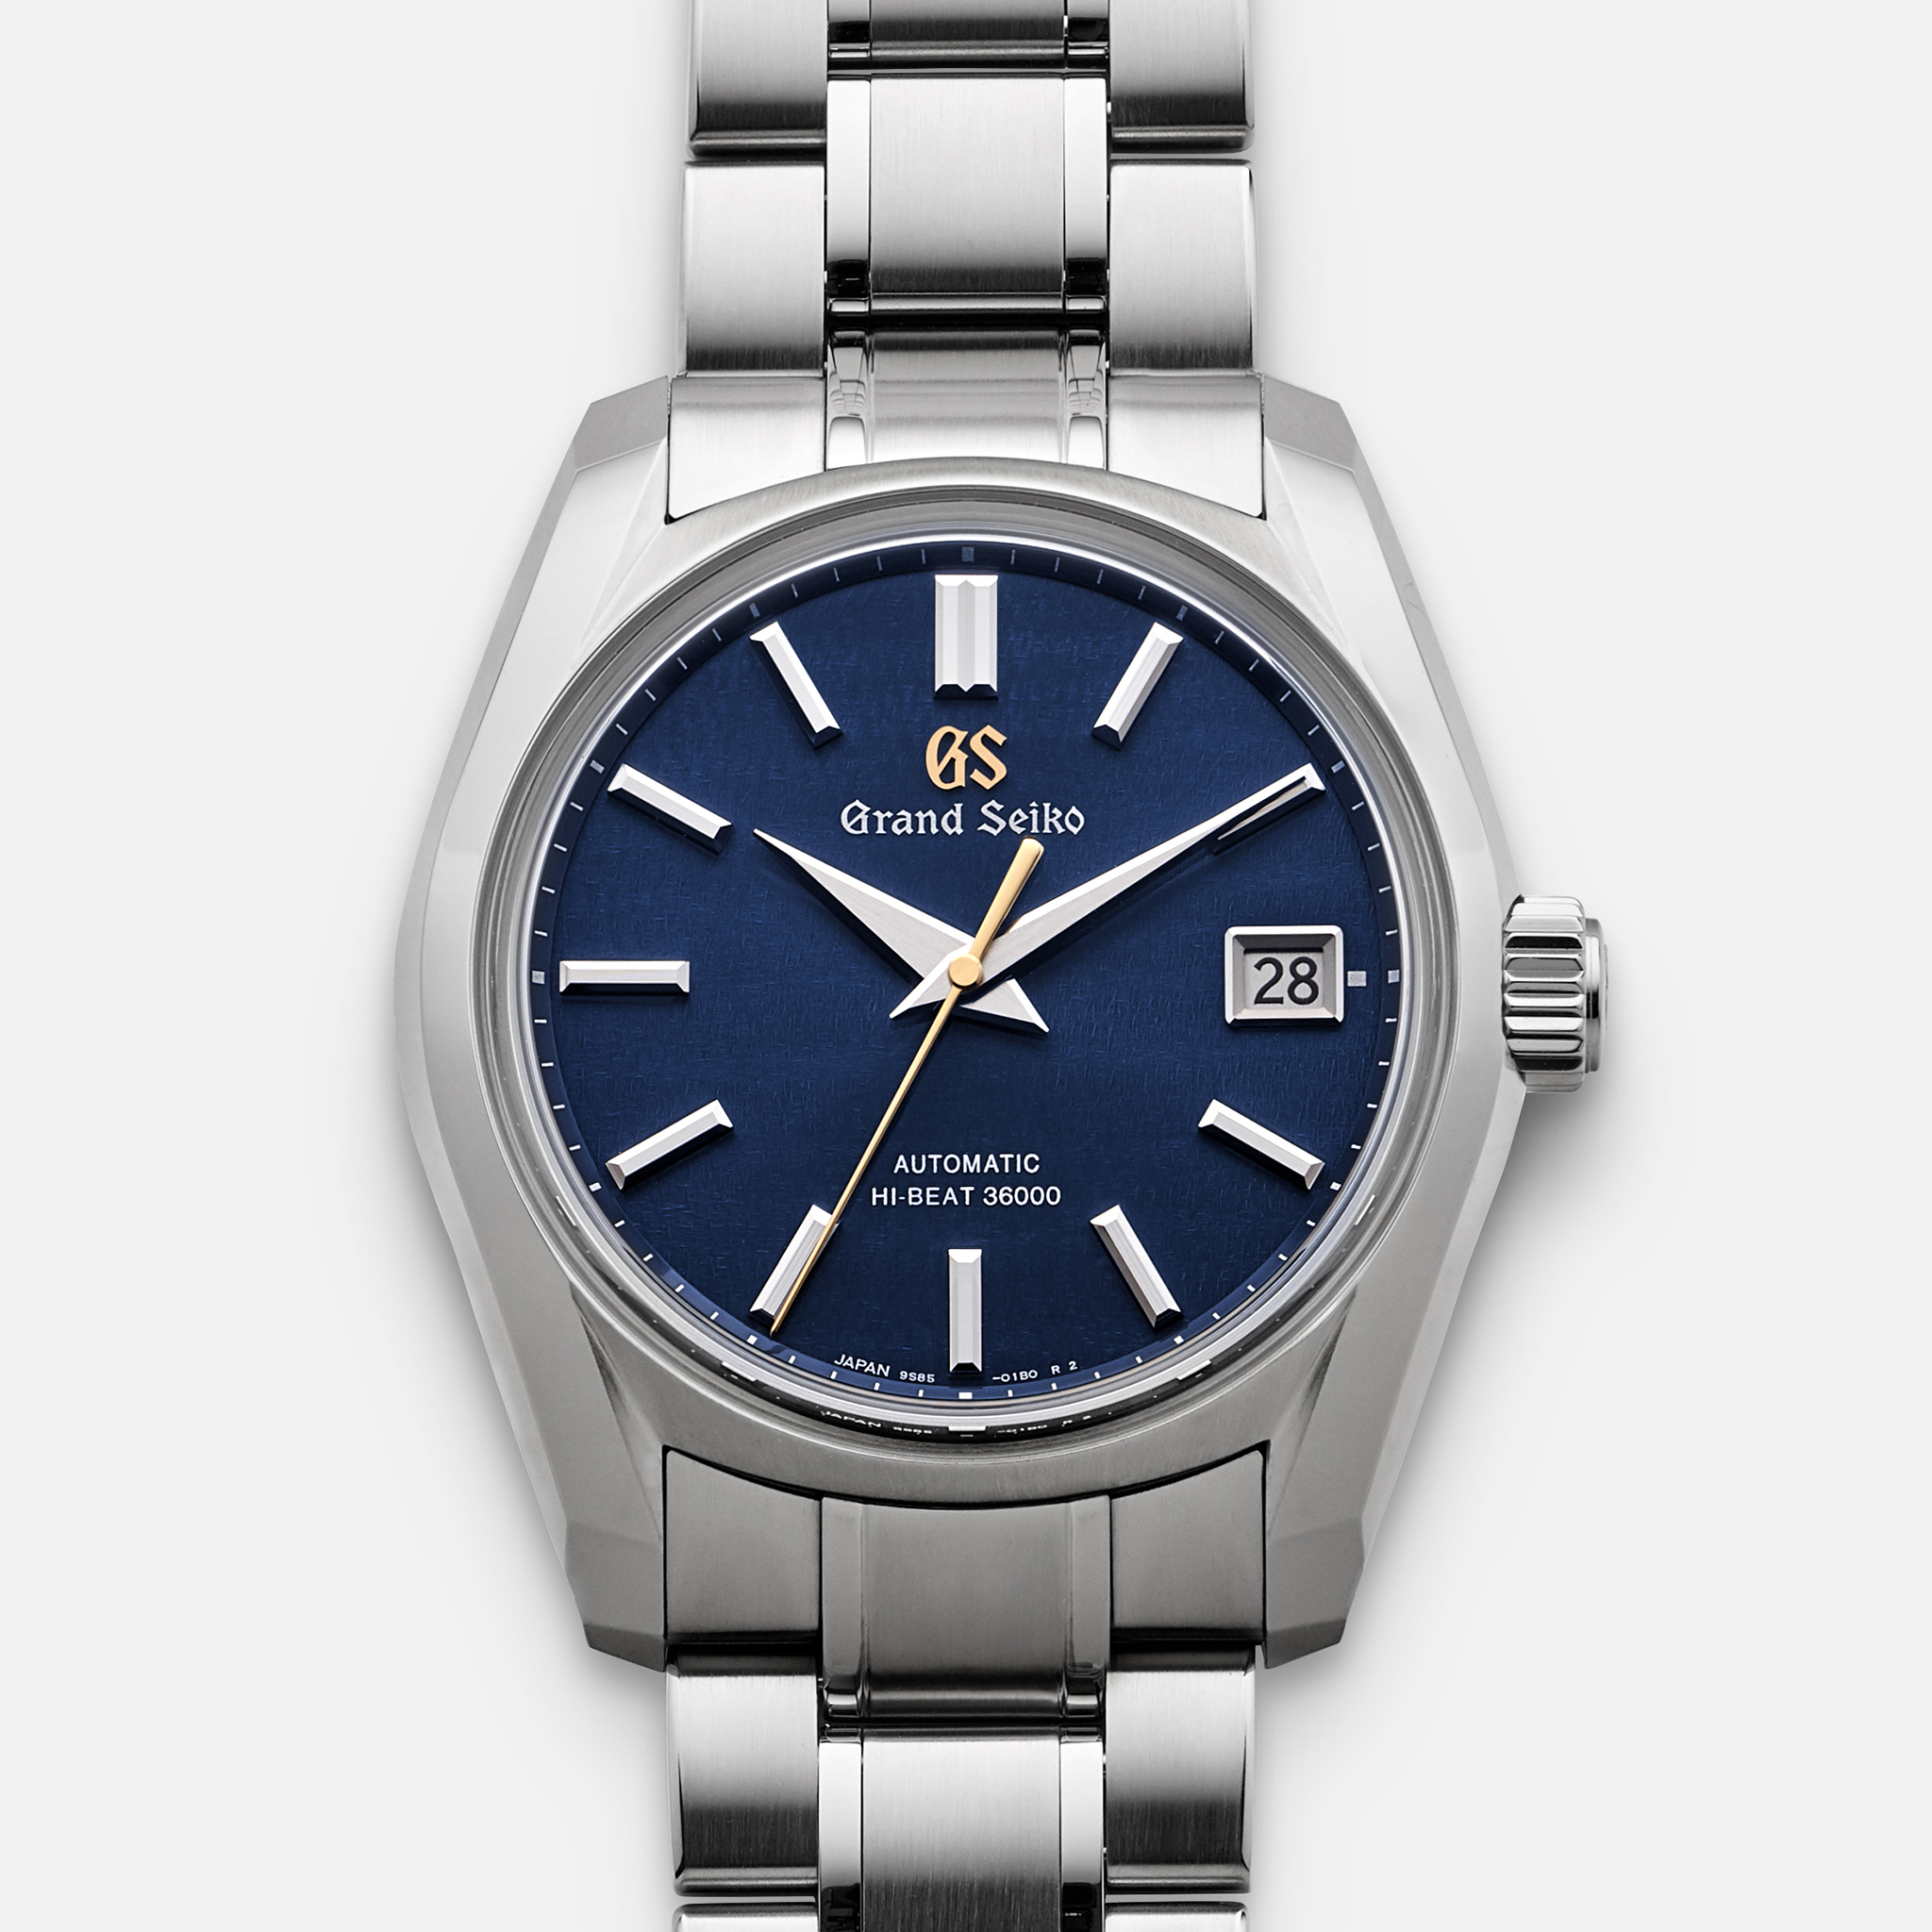 Grand Seiko Fall Watch Top Sellers, SAVE 60%.